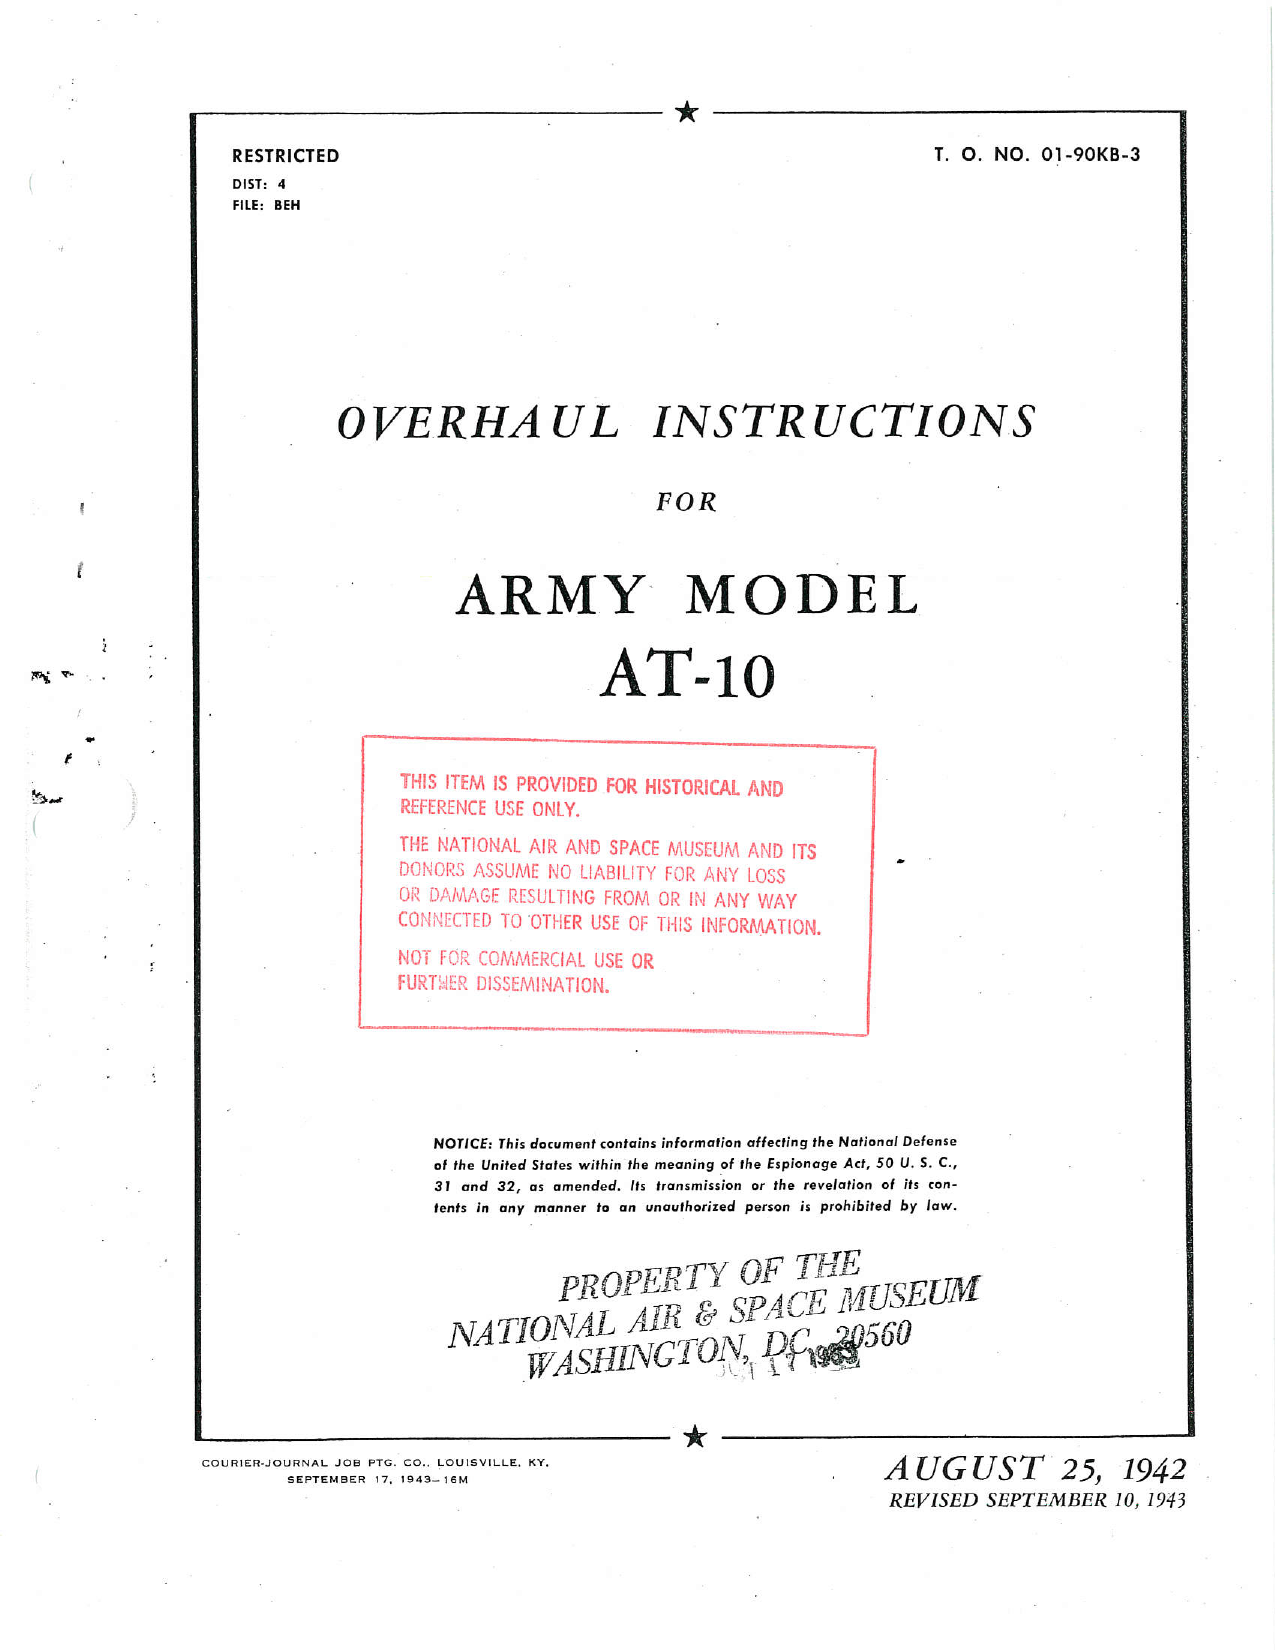 Sample page 73 from AirCorps Library document: Overhaul Instructions - AT-10